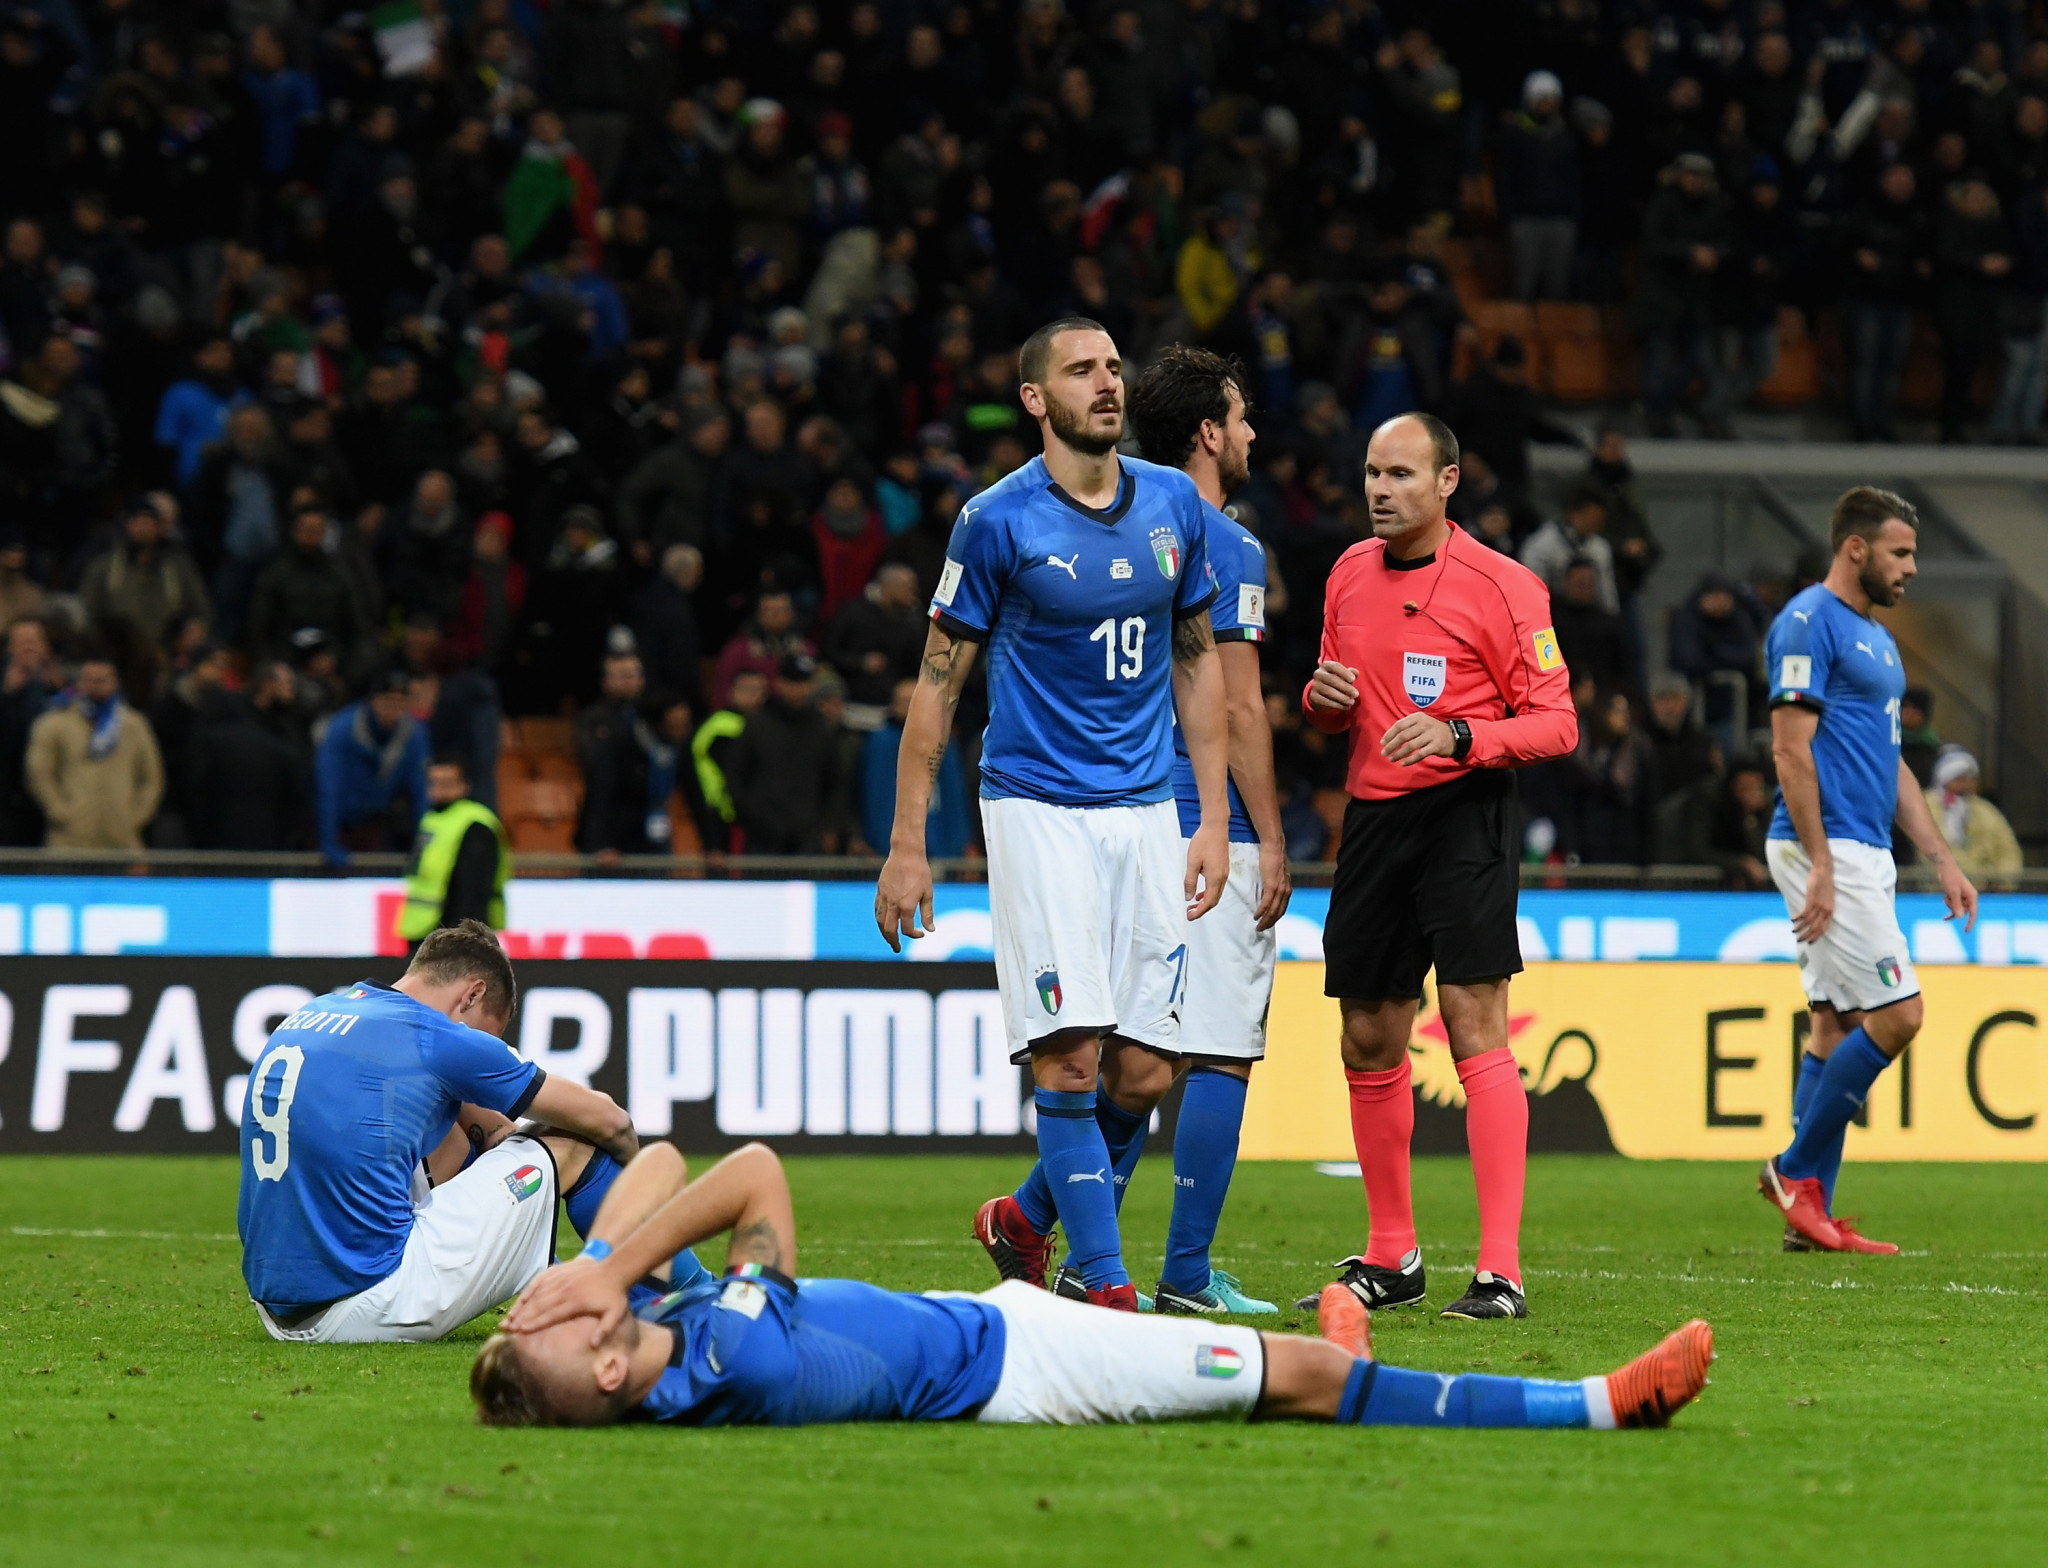 Italy failed to qualify for the World Cup after a 0-0 draw with Sweden in the second leg of their play-off ©Getty Images